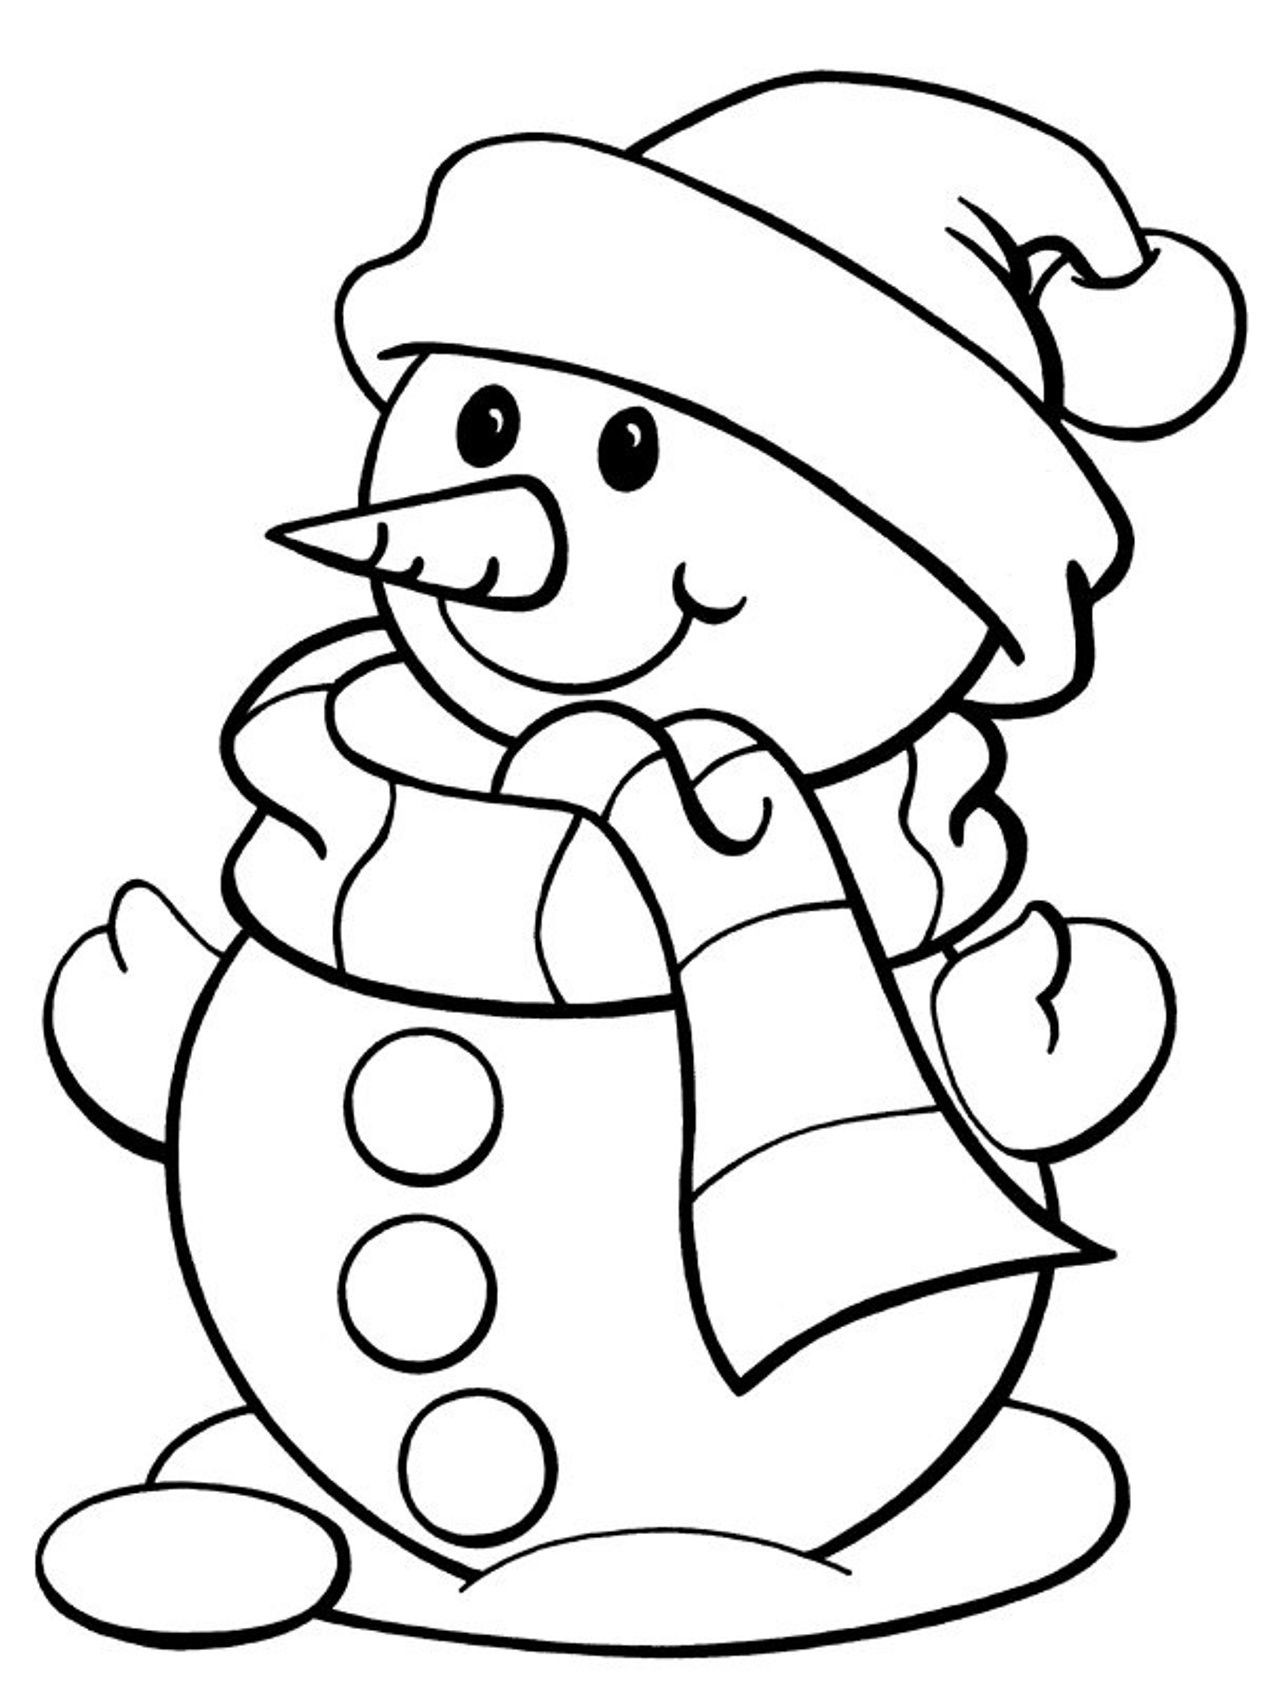 Malvorlagen Winter
 Winter Coloring Snowman Coloring Pages Winter Free